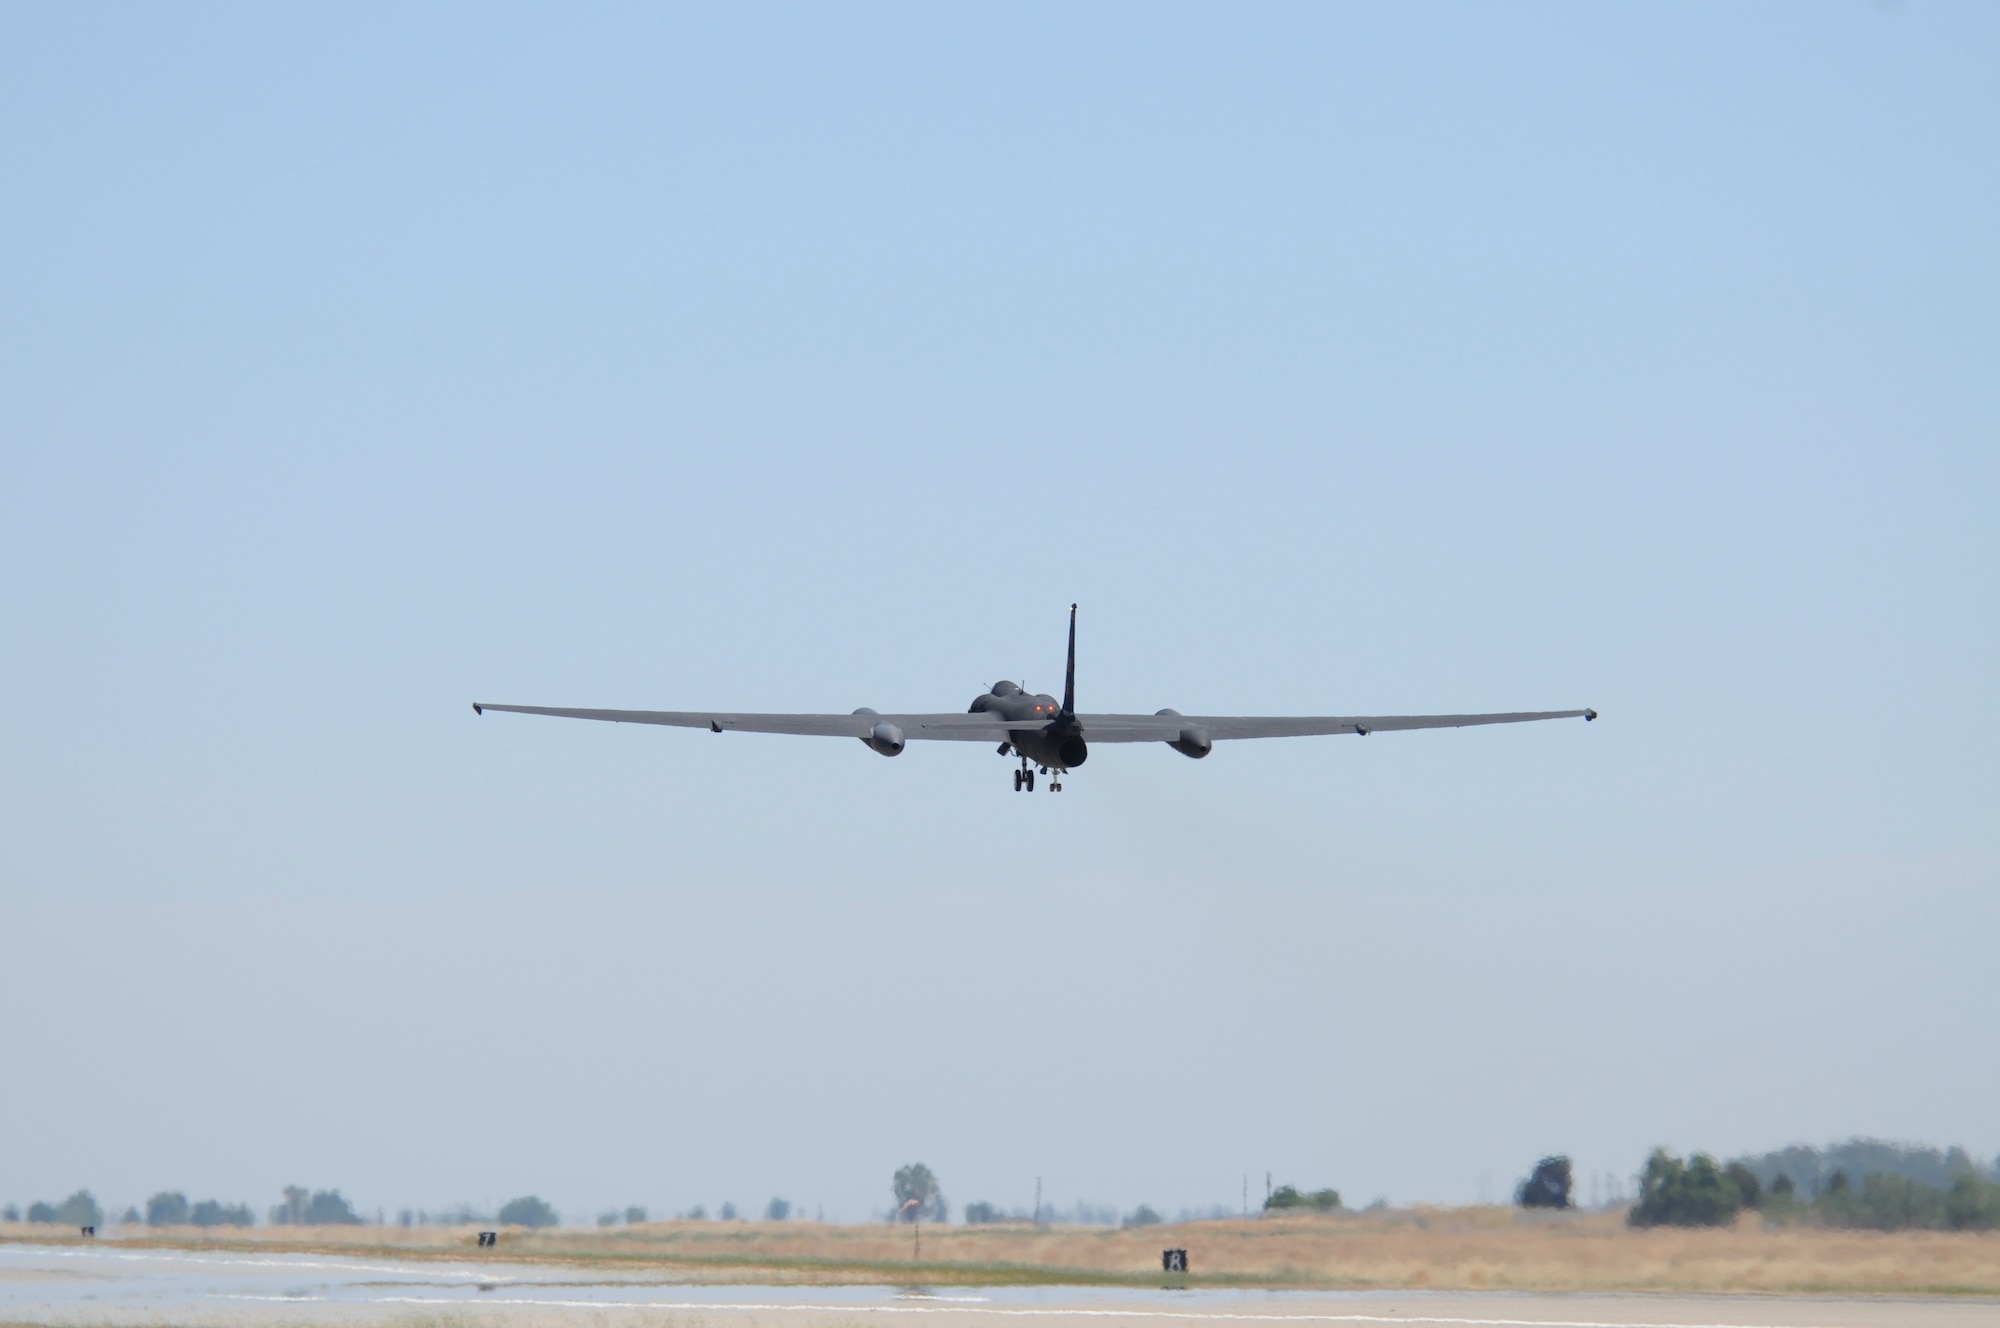 A U-2 Dragon Lady from Beale Air Force Base, California, takes off June 6, 2016, headed for Royal Air Force Fairford in Gloucestershire, England. The jet was met by an en route recovery team (ERT) in England to transition aircraft from and to Beale and forward operating locations (FOL). The ERT is used like a pit crew at the midway point in Fairford, ensuring aircraft are prepared to make it to their next destination. (U.S. Air Force photo by Senior Airman Michael Hunsaker)